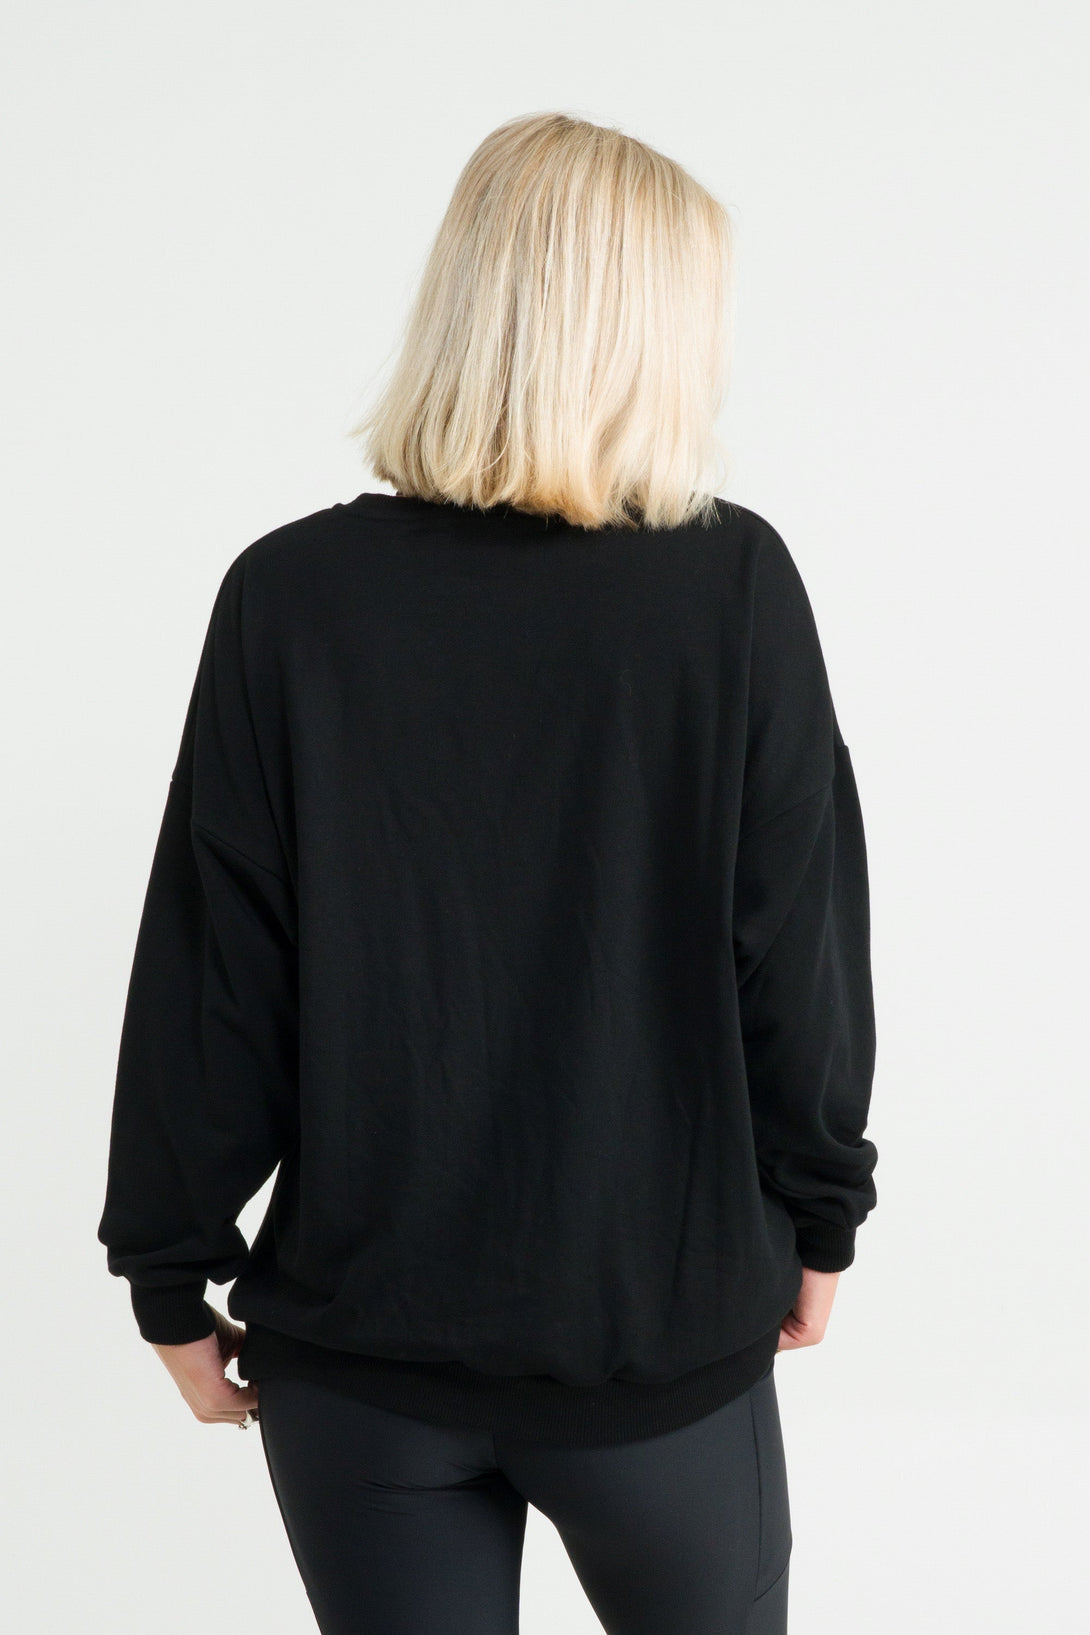 Black French Terry - Oversized Sweater-Activewear-Exoticathletica